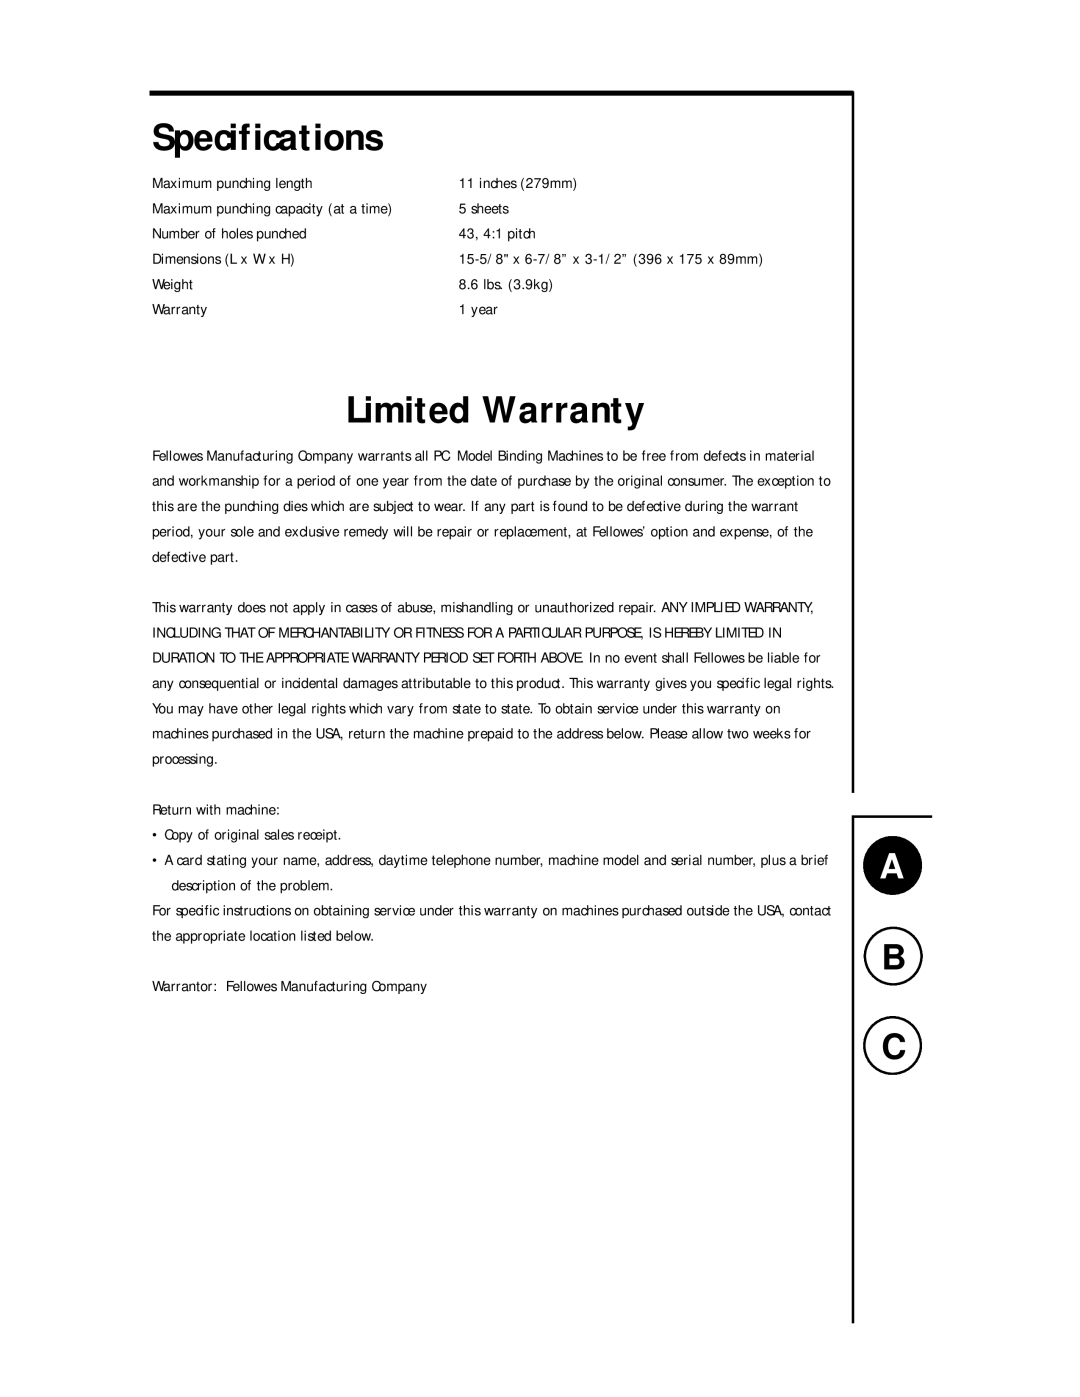 Fellowes PC 100 manual Specifications, Limited Warranty 